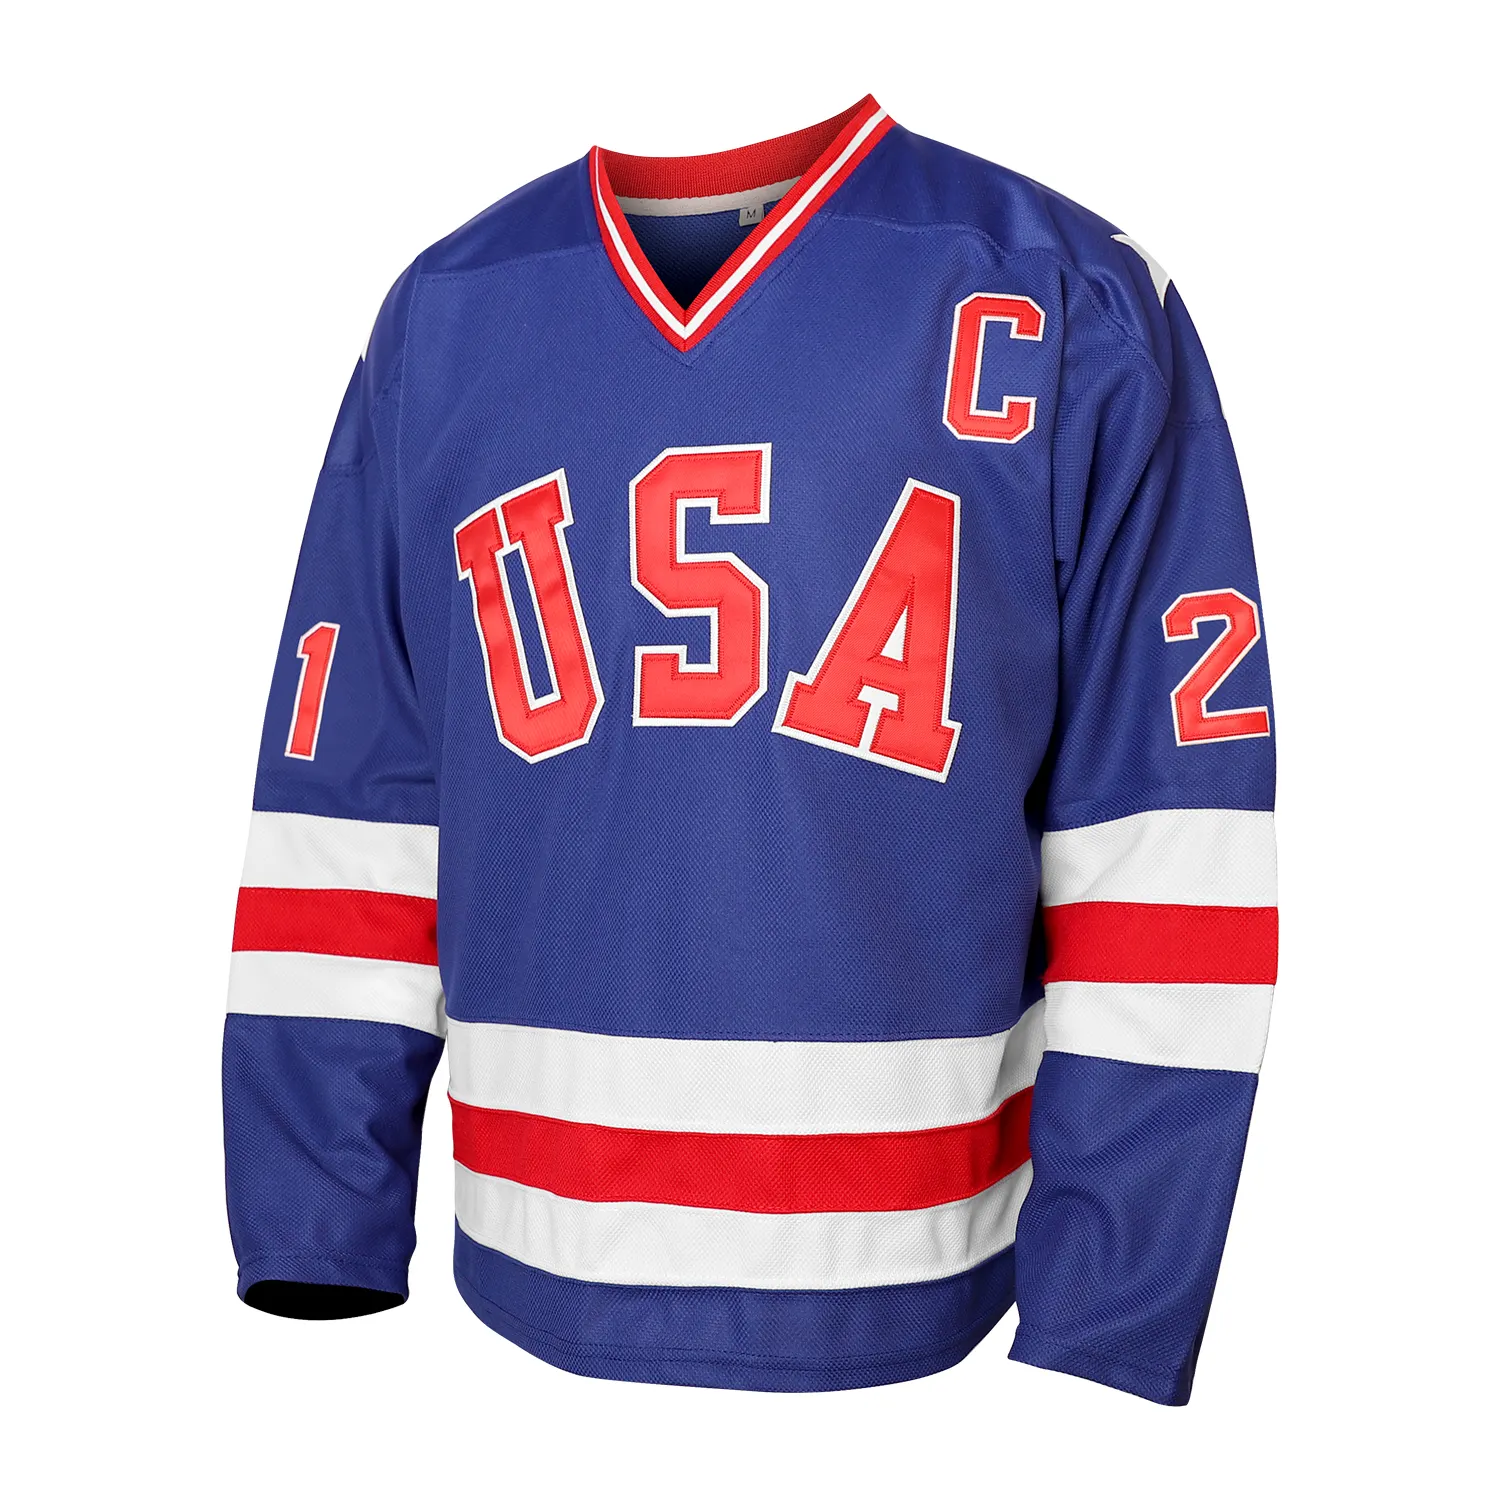 USA Hockey Jersey Retro 21 Blue Vintage Embroidered Stitched Hockey Jersey Quick Dry Tracksuit